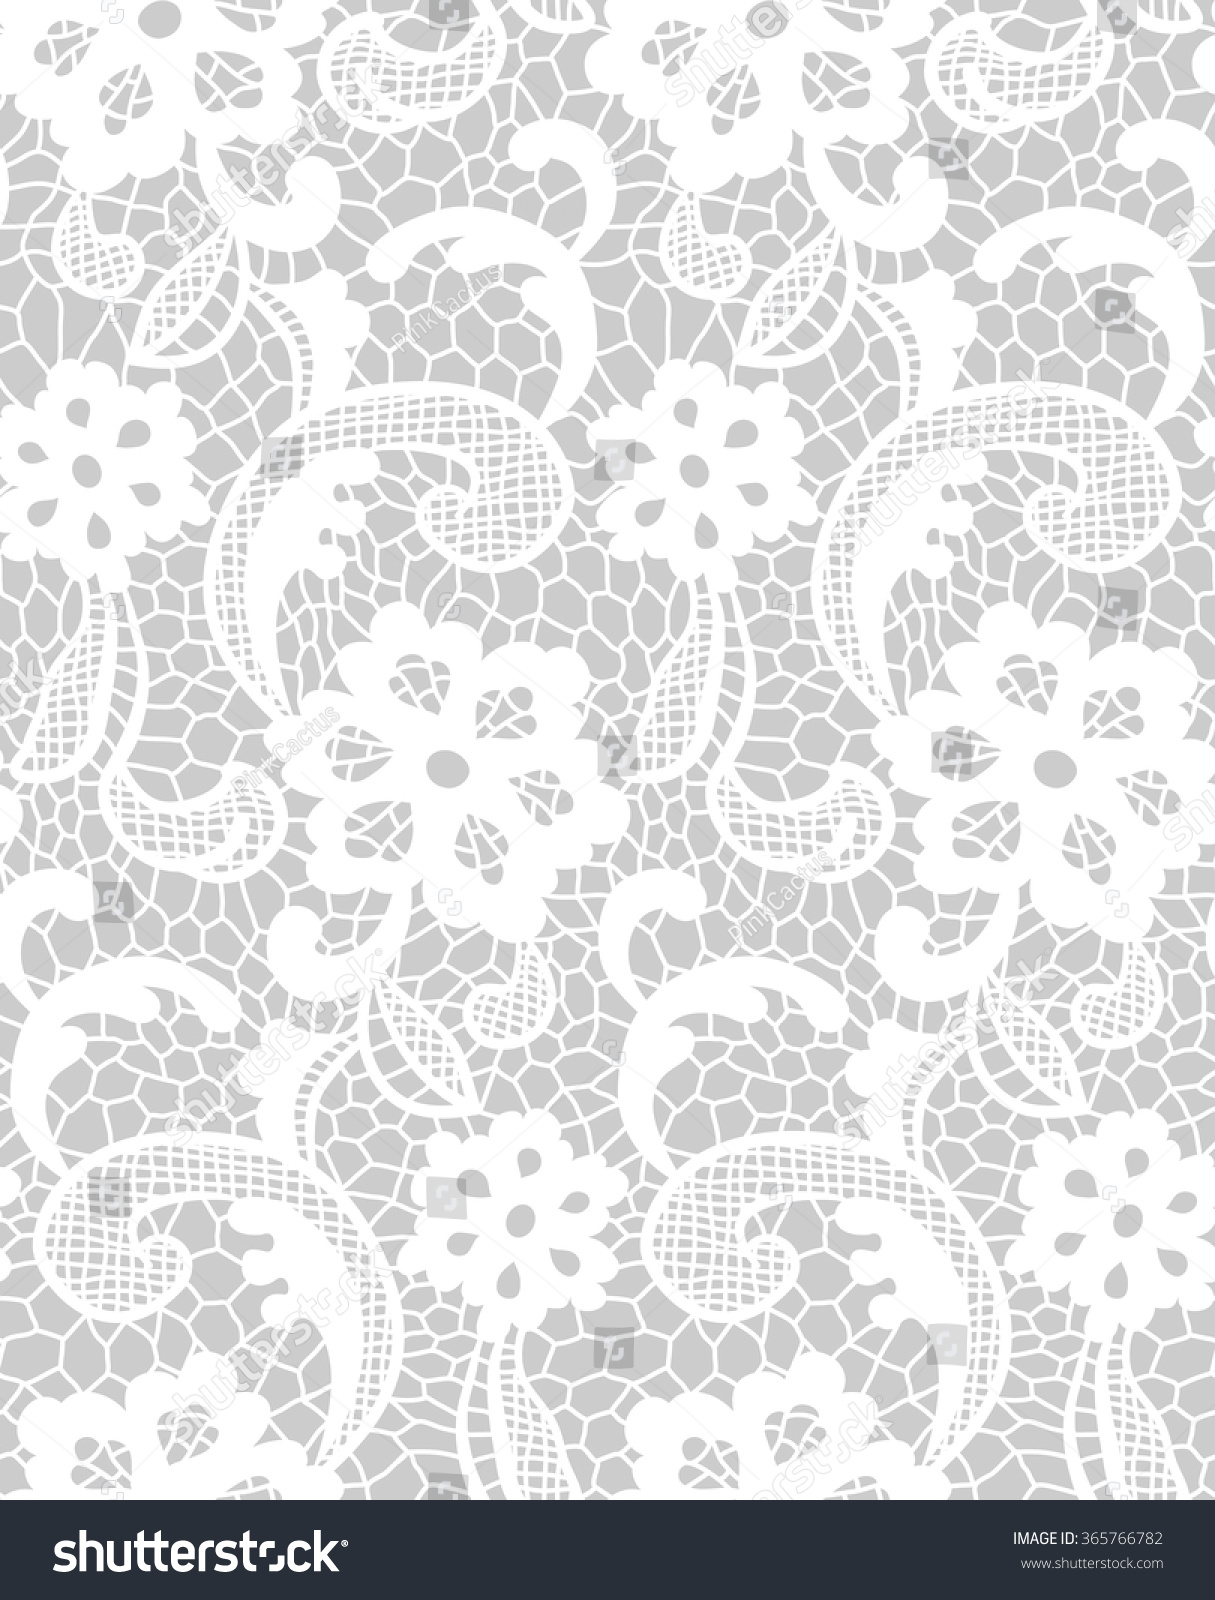 Lace Pattern Floral Motifs Grey White Stock Vector 